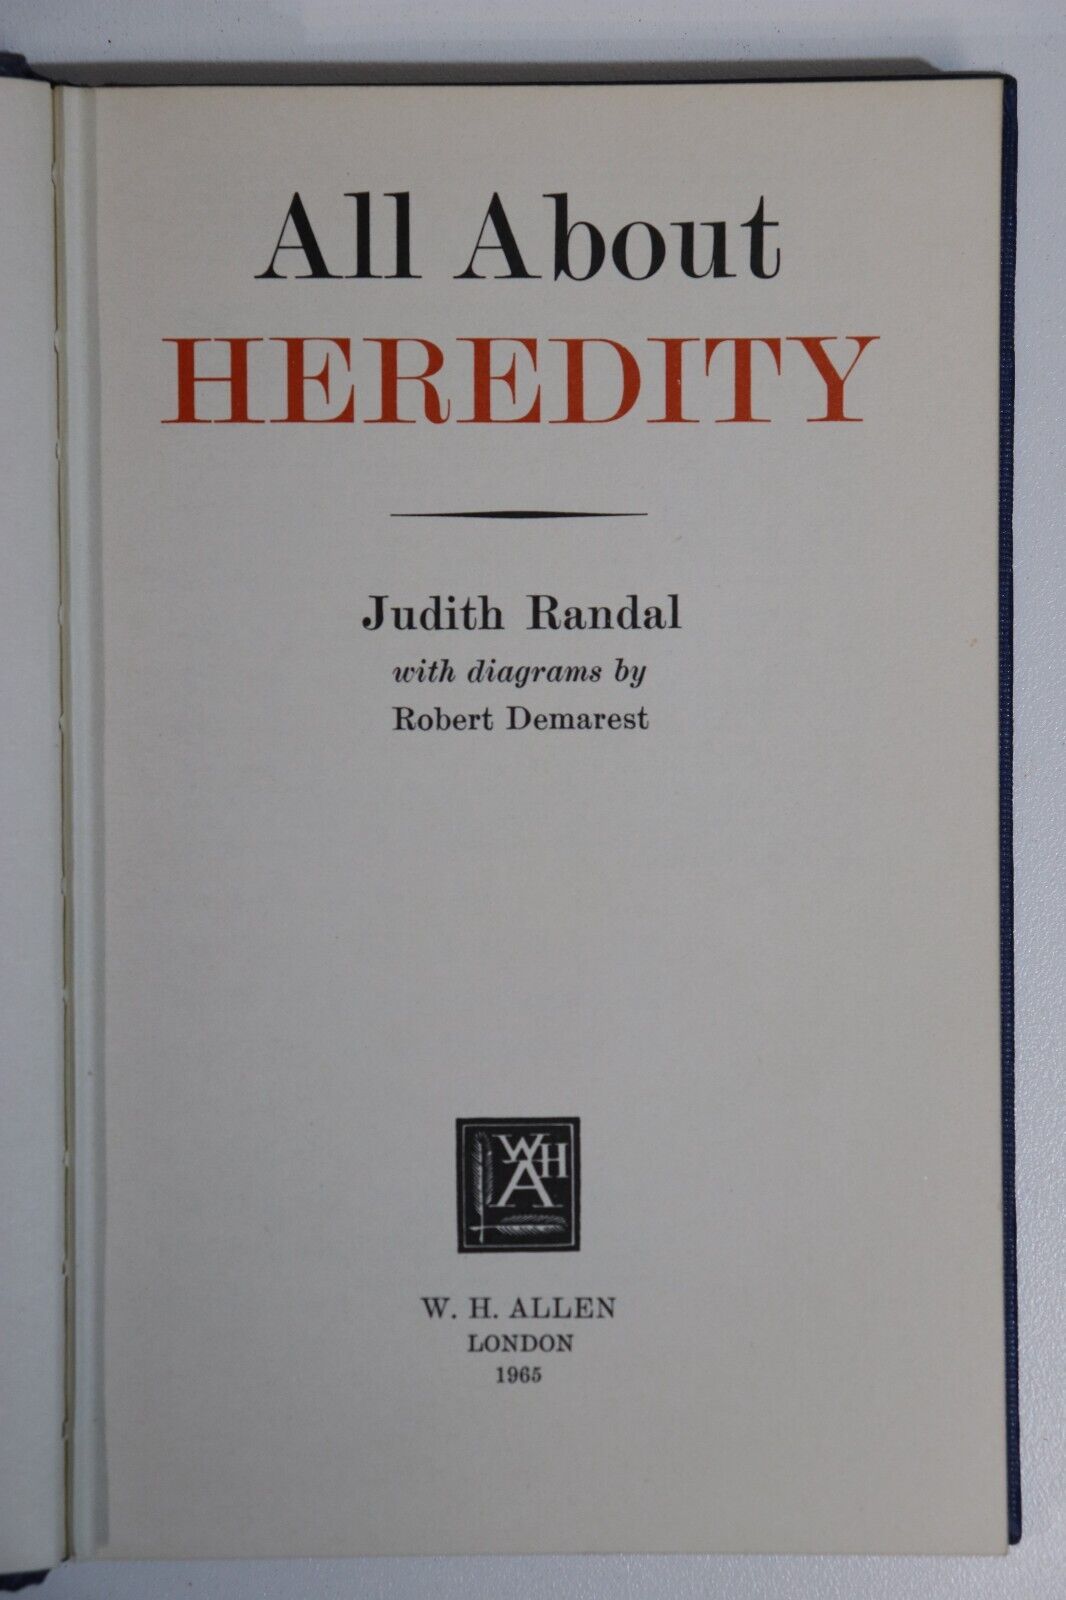 All About Heredity by Judith Randal - 1965 - Vintage Medical Reference Book - 0